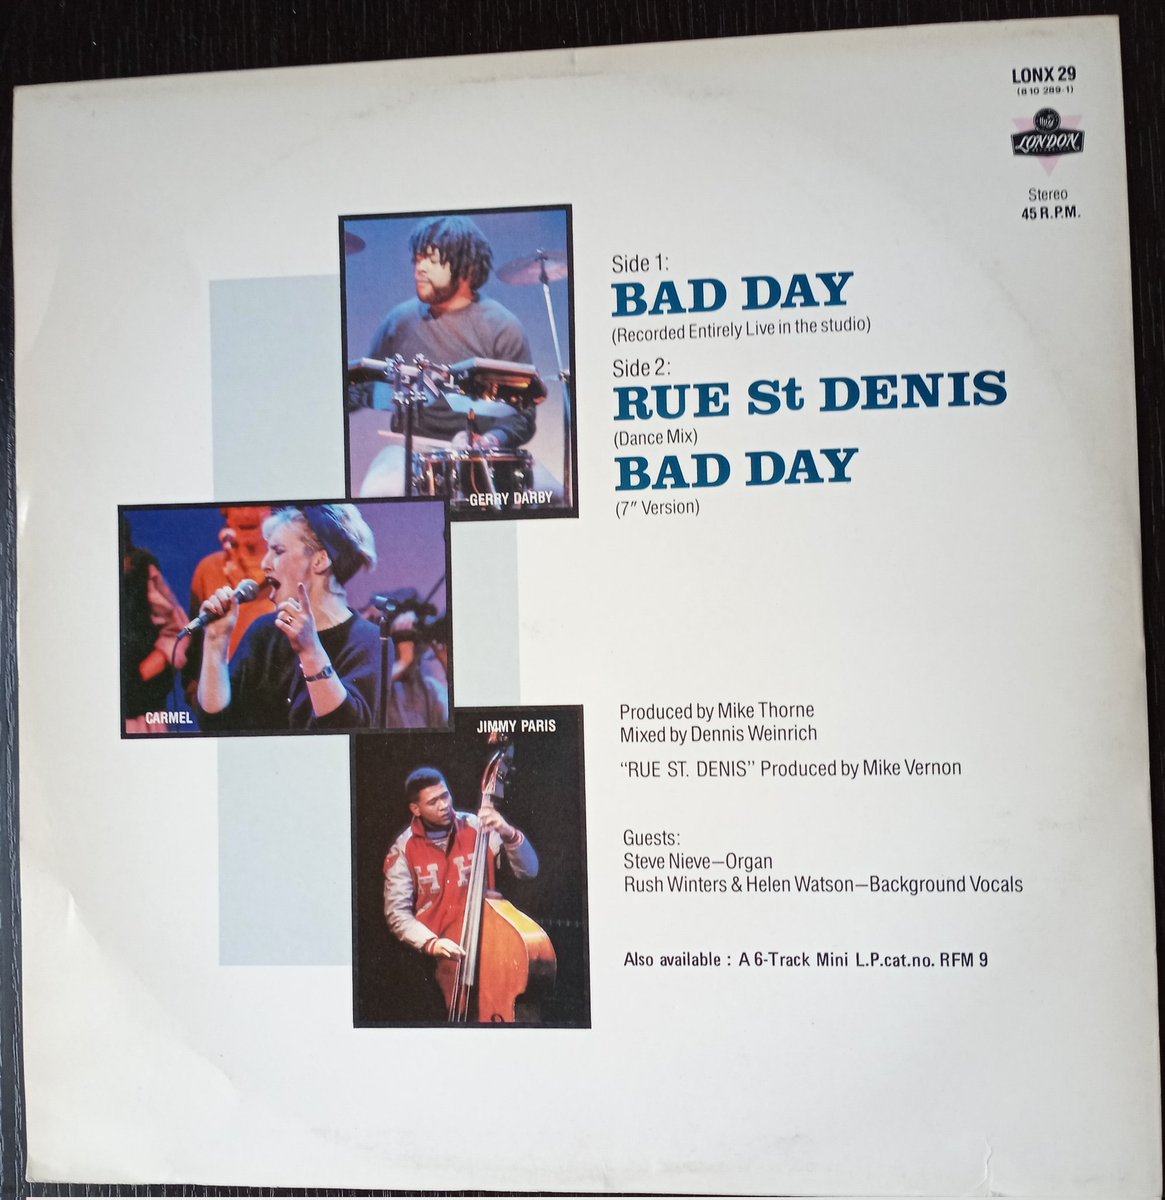 Day 30 - #12inch80s 

Bad Day
- Carmel, 1983

A good day to play this fine soul/jazz song again. On my favourite holiday ever, was staying with a pal in her Notting Hill bedsit, heard this & got the 12-incher at Virgin Records on Oxford Street. #fusion
#popsoul #soulmusic